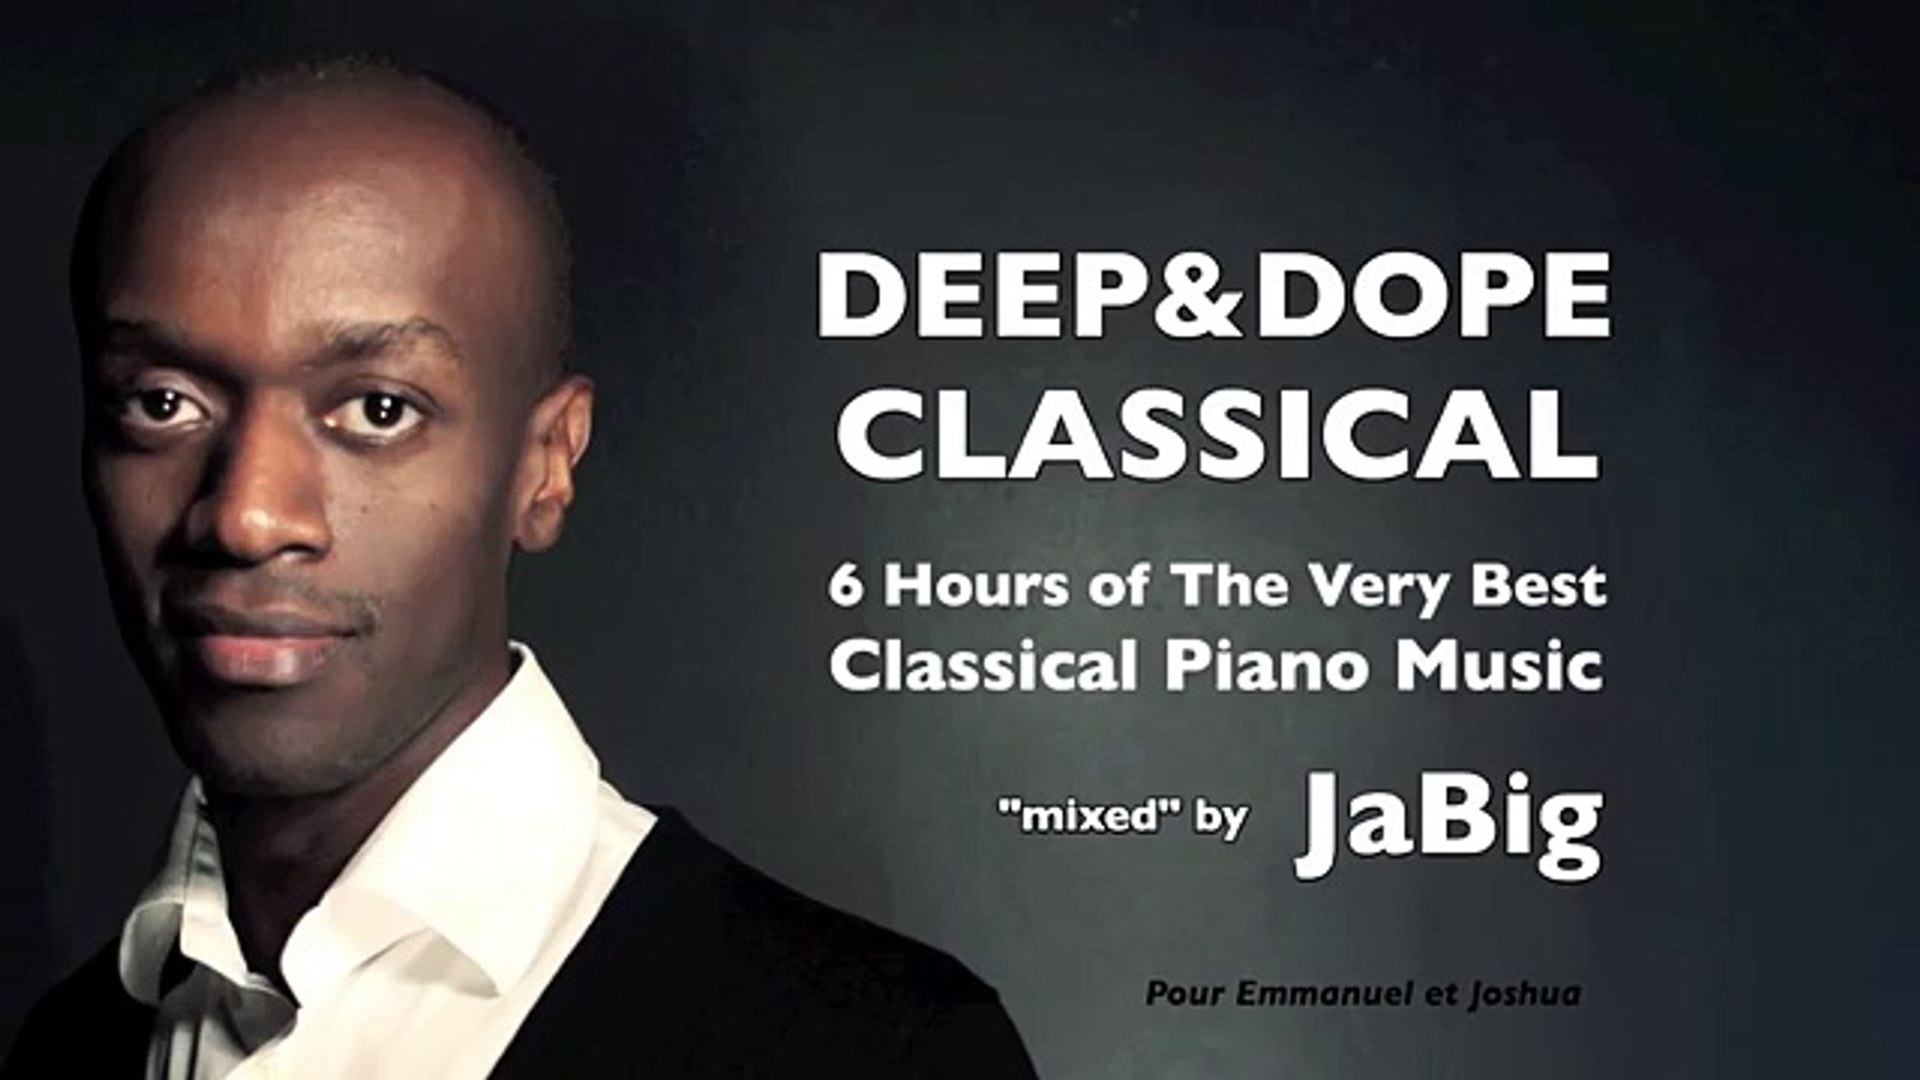 6 Hour Classical Music Playlist by JaBig: Beautiful Piano Mix for Studying,  Homework, Essay Writing - Dailymotion Video